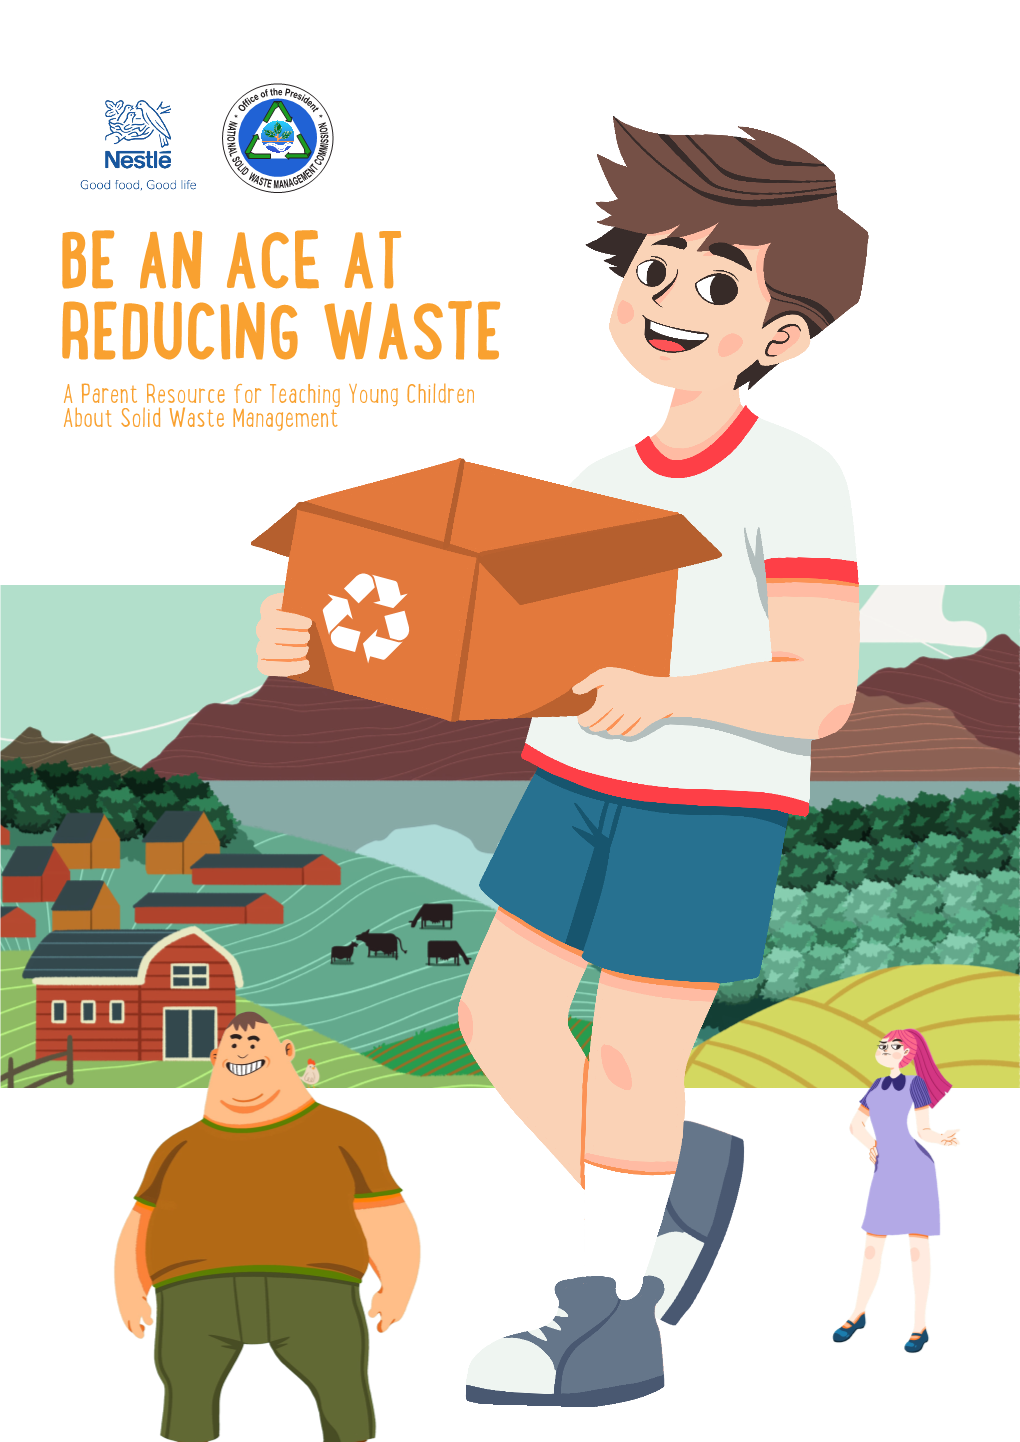 A Parent Resource for Teaching Young Children About Solid Waste